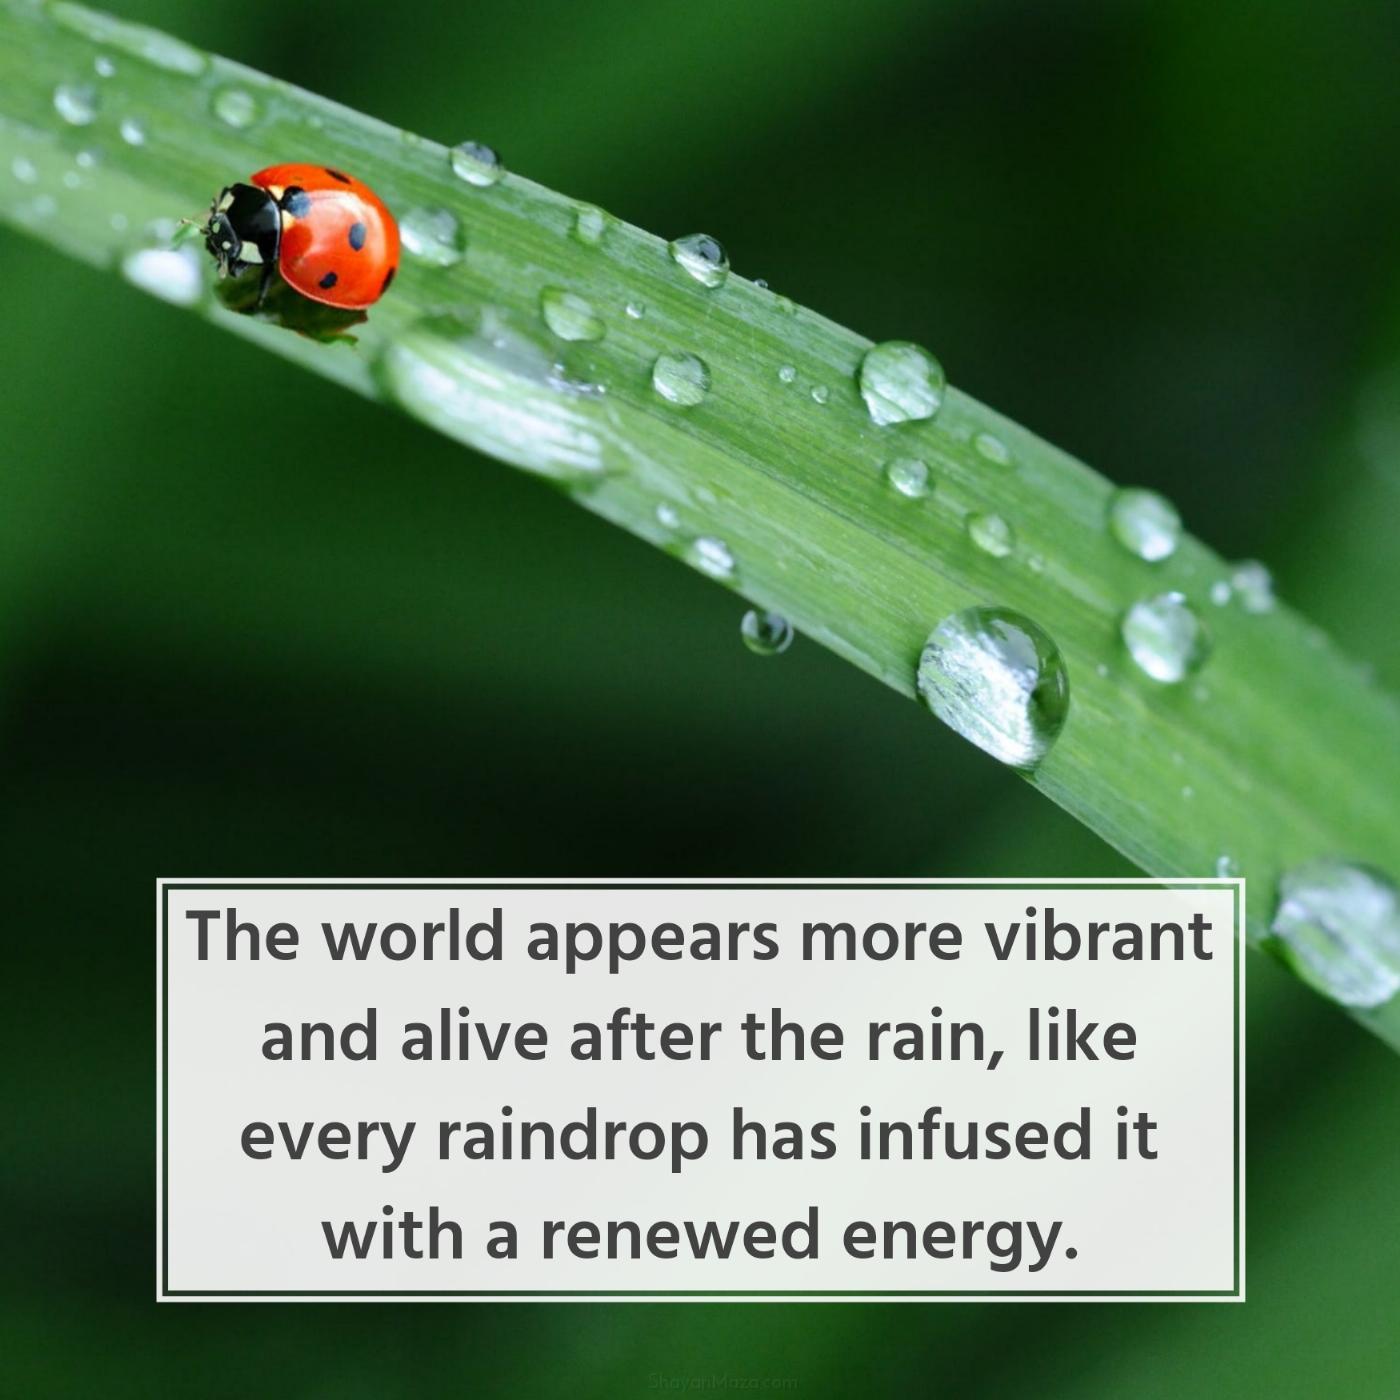 The world appears more vibrant and alive after the rain